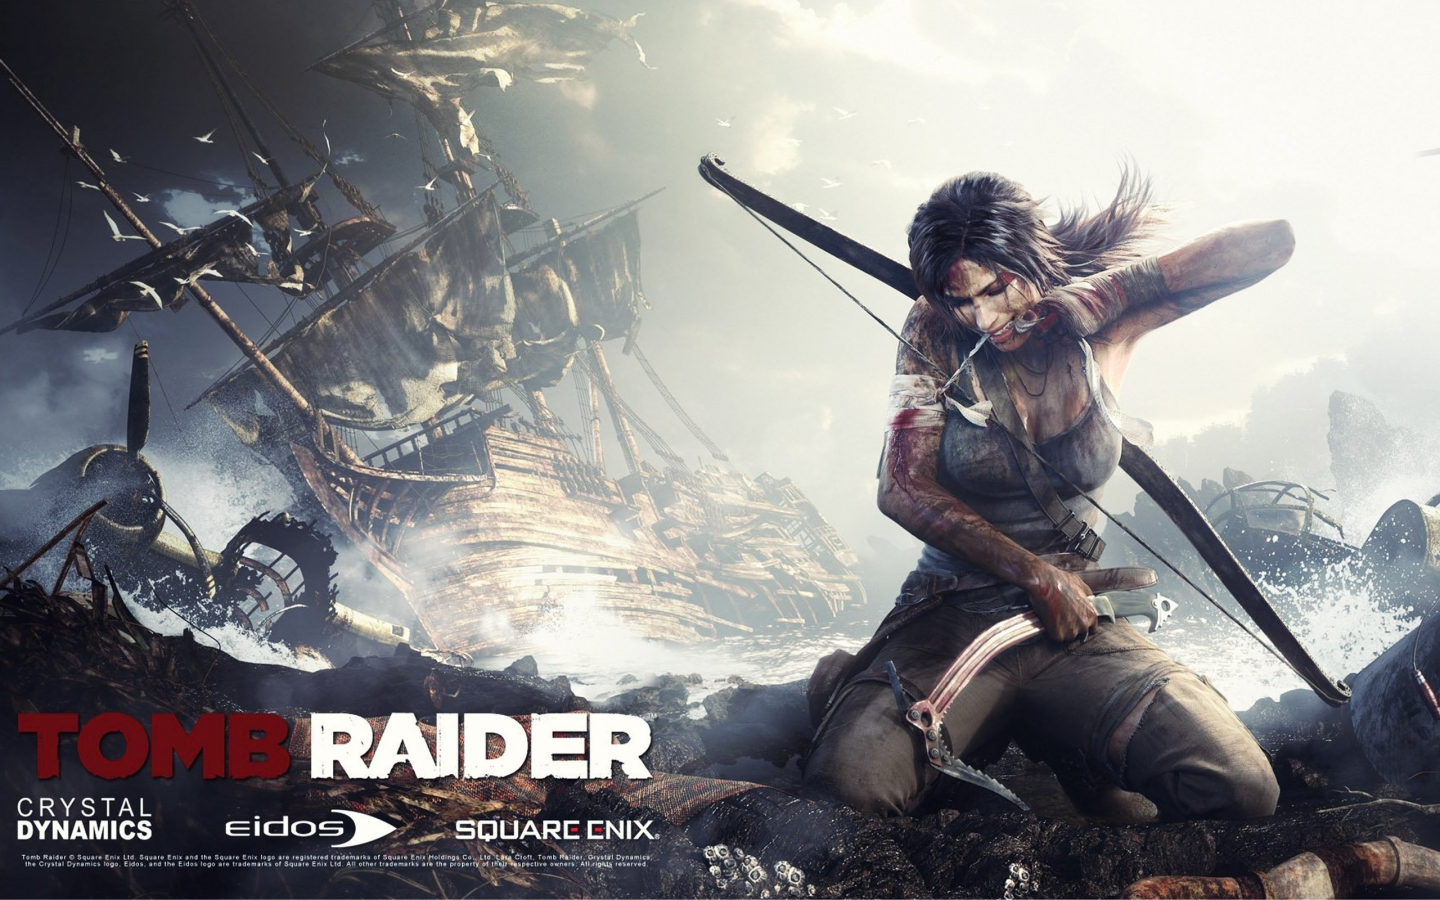 Tomb Raider Weapons Unlocked for 1440 x 900 widescreen resolution